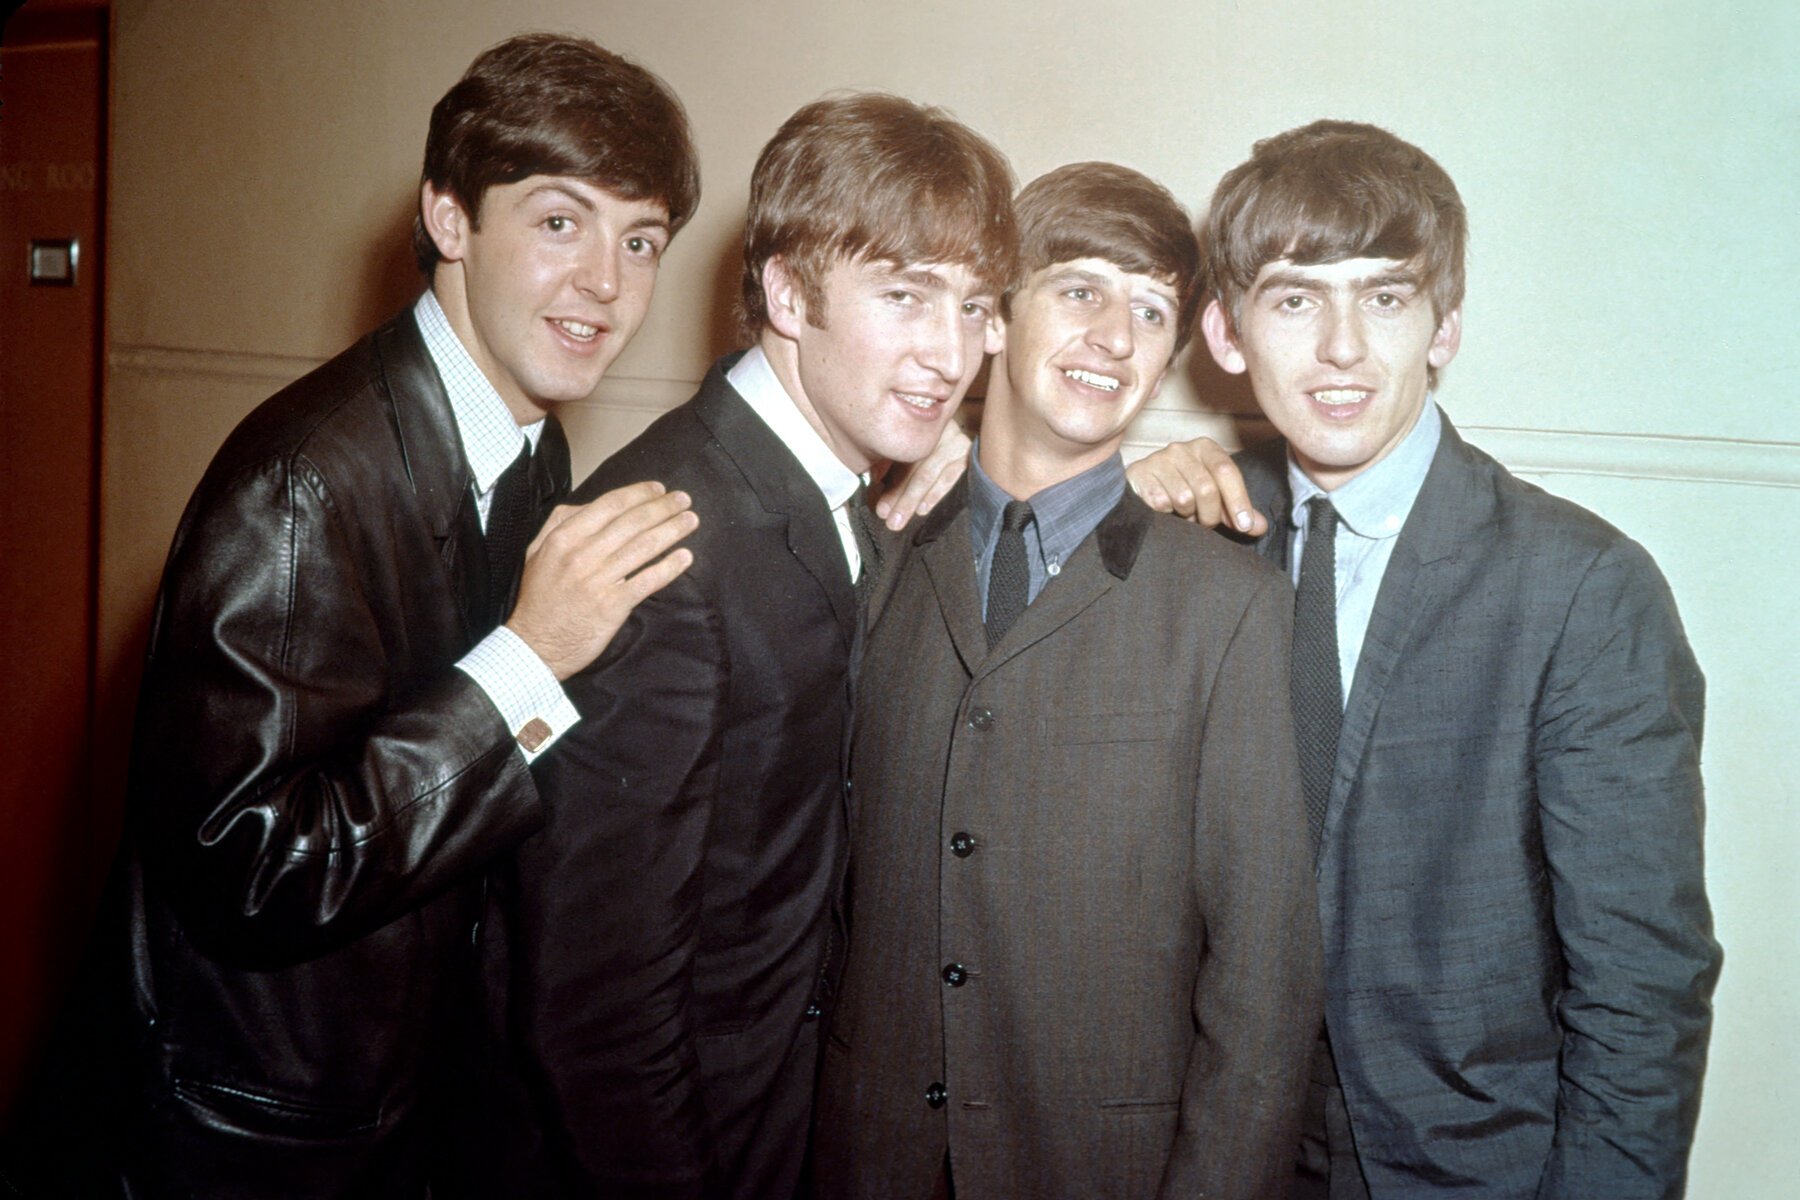 Rock and roll band The Beatles pose for a portrait in 1964. (L-R) Paul McCartney, John Lennon, Ringo Starr, George Harrison.